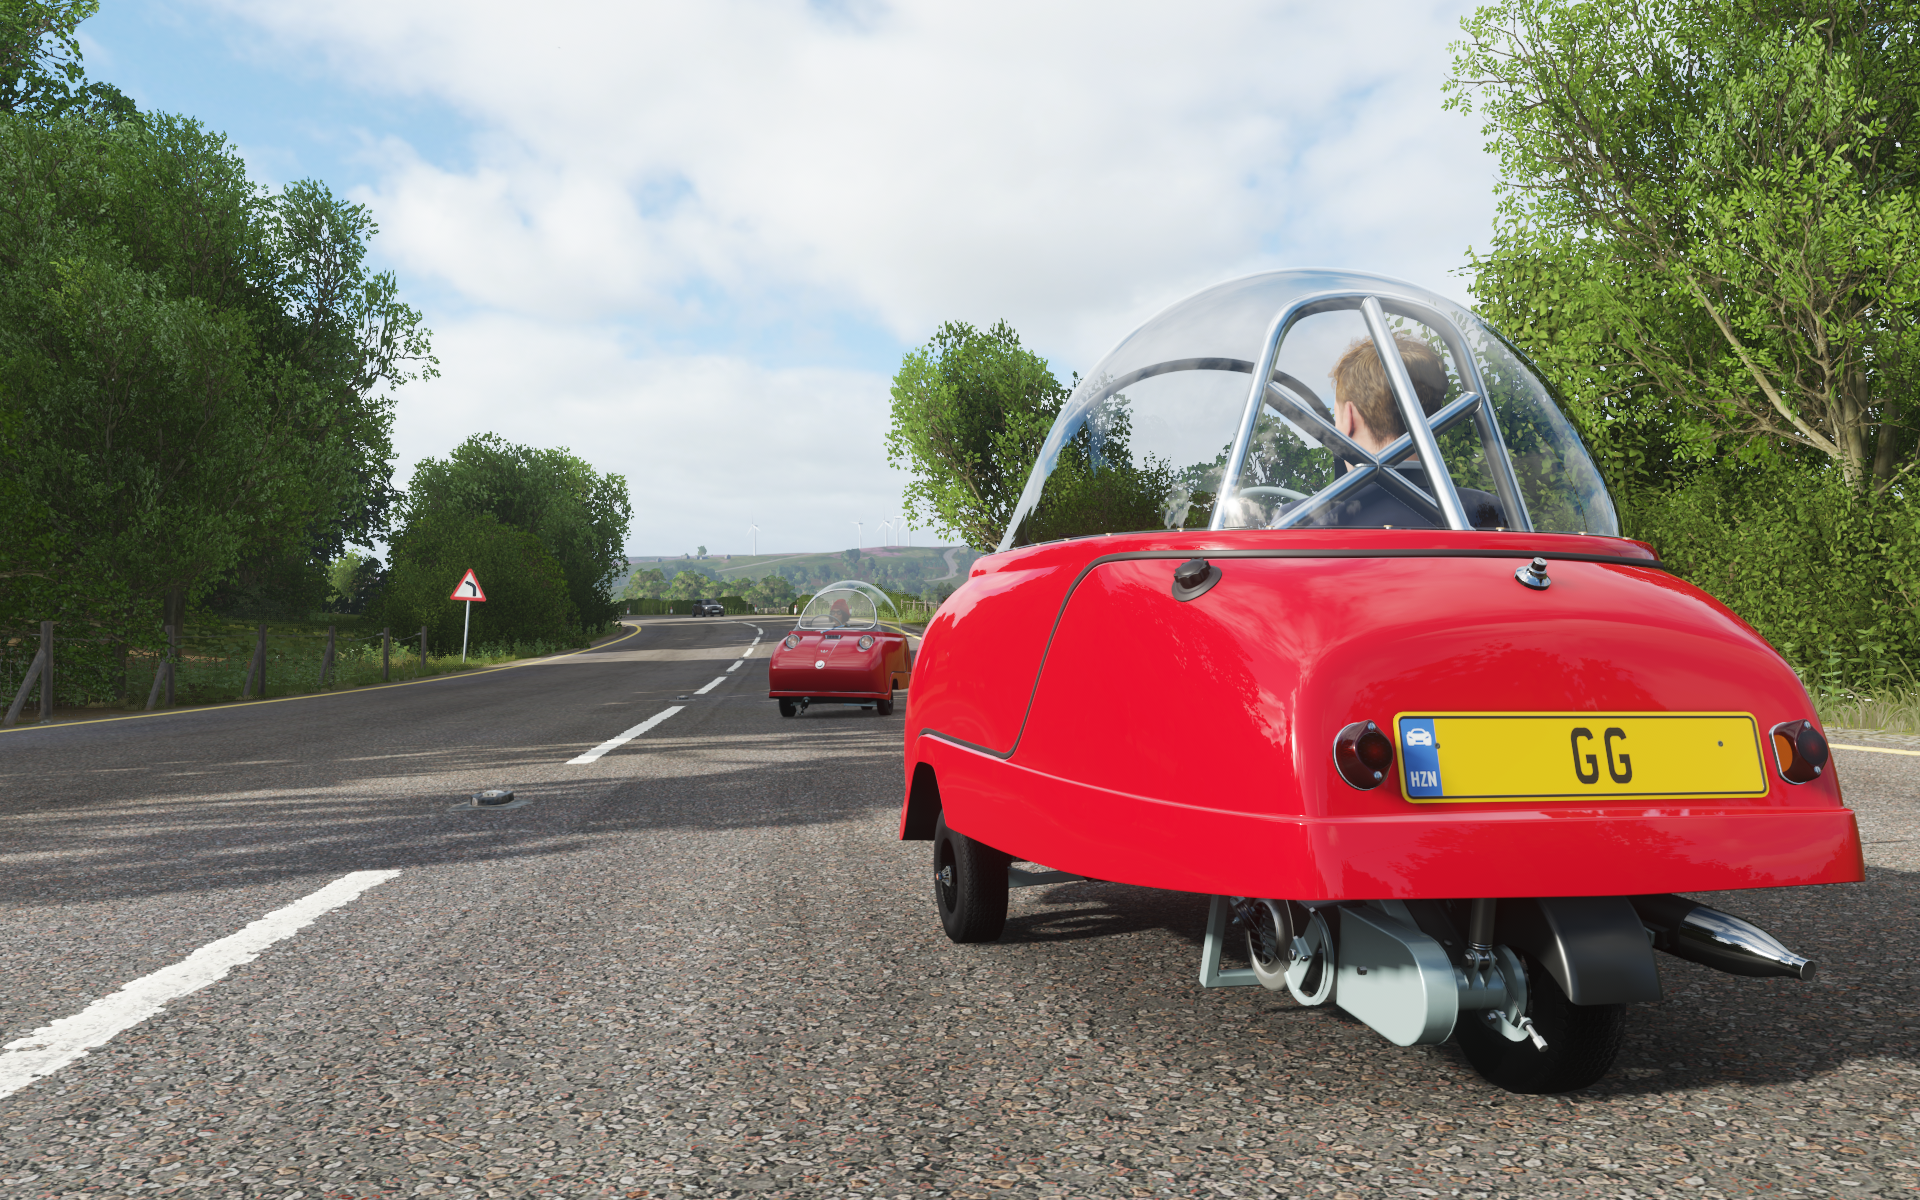 General 1920x1200 Forza Forza Horizon Forza Horizon 4 road video games rear view video game art screen shot video game characters CGI sky clouds driving trees licence plates signs British cars PlaygroundGames